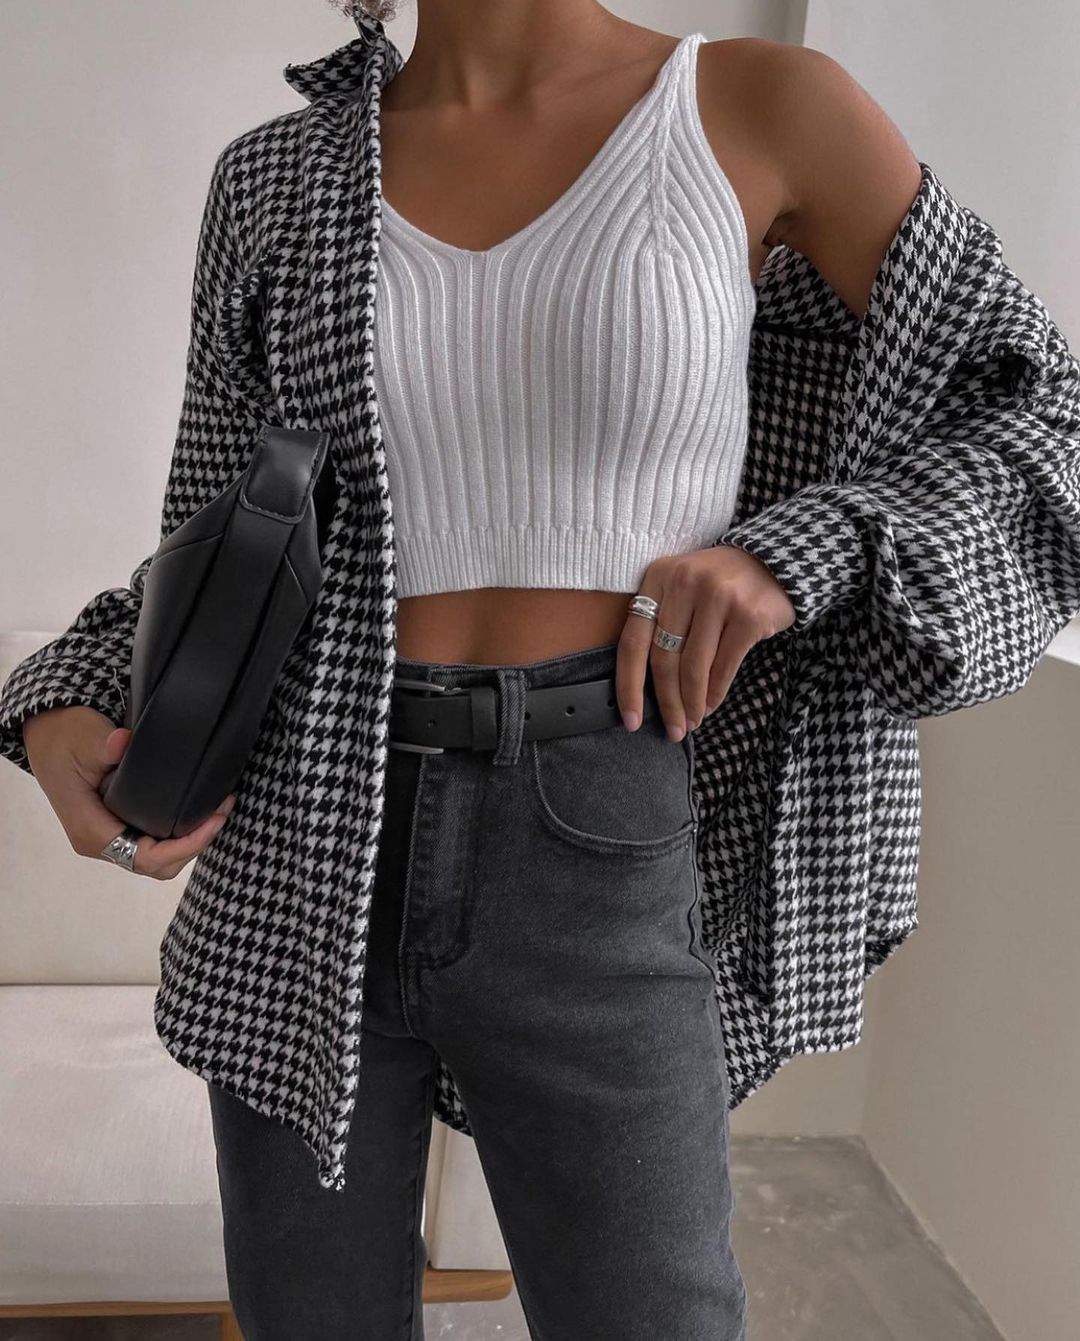 50 Trendy Outfit Ideas To Look More Stylish In 2021 images 36